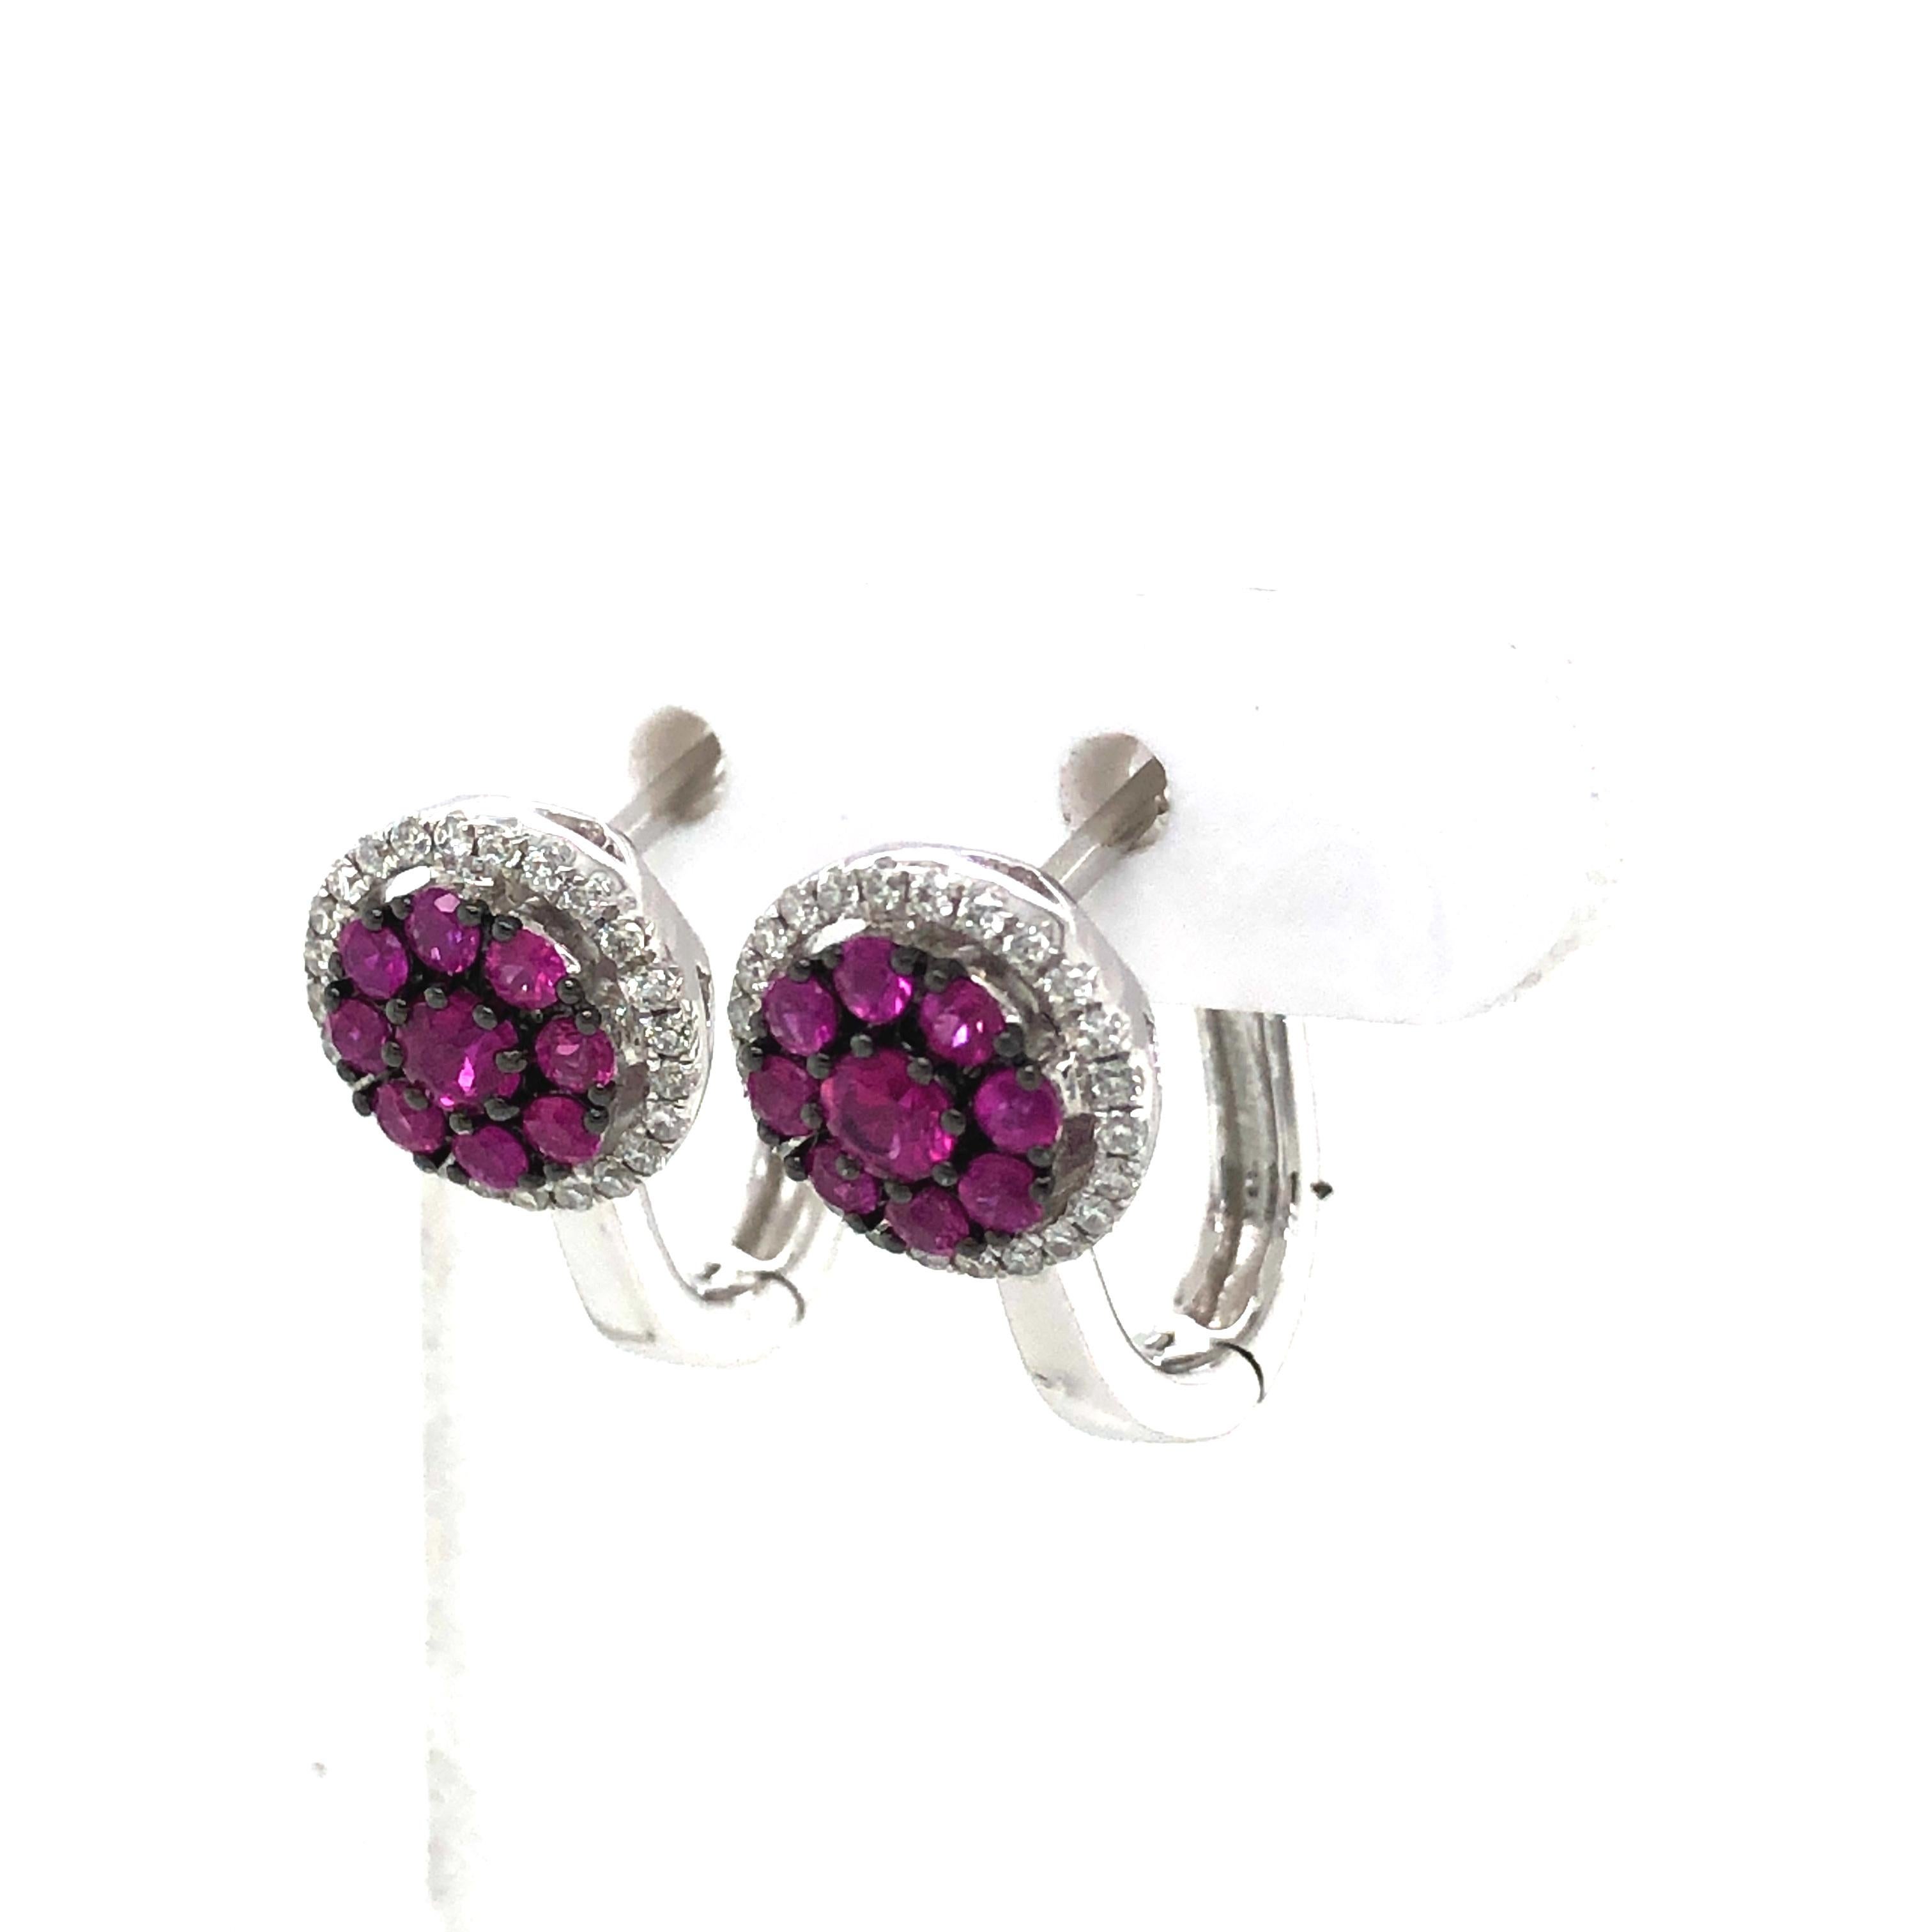 HJN Inc. Ring featuring Natural Ruby Cluster Earrings

Ruby Diamond Weight: 0.52 Carats
Round-Cut Diamond Weight: 0.15 Carats

Clarity Grade: SI1
Color Grade: G-H
Total Diamond Weight: 0.67
Polish and Symmetry: Very Good
Style Number: EGJ1011RDWG/